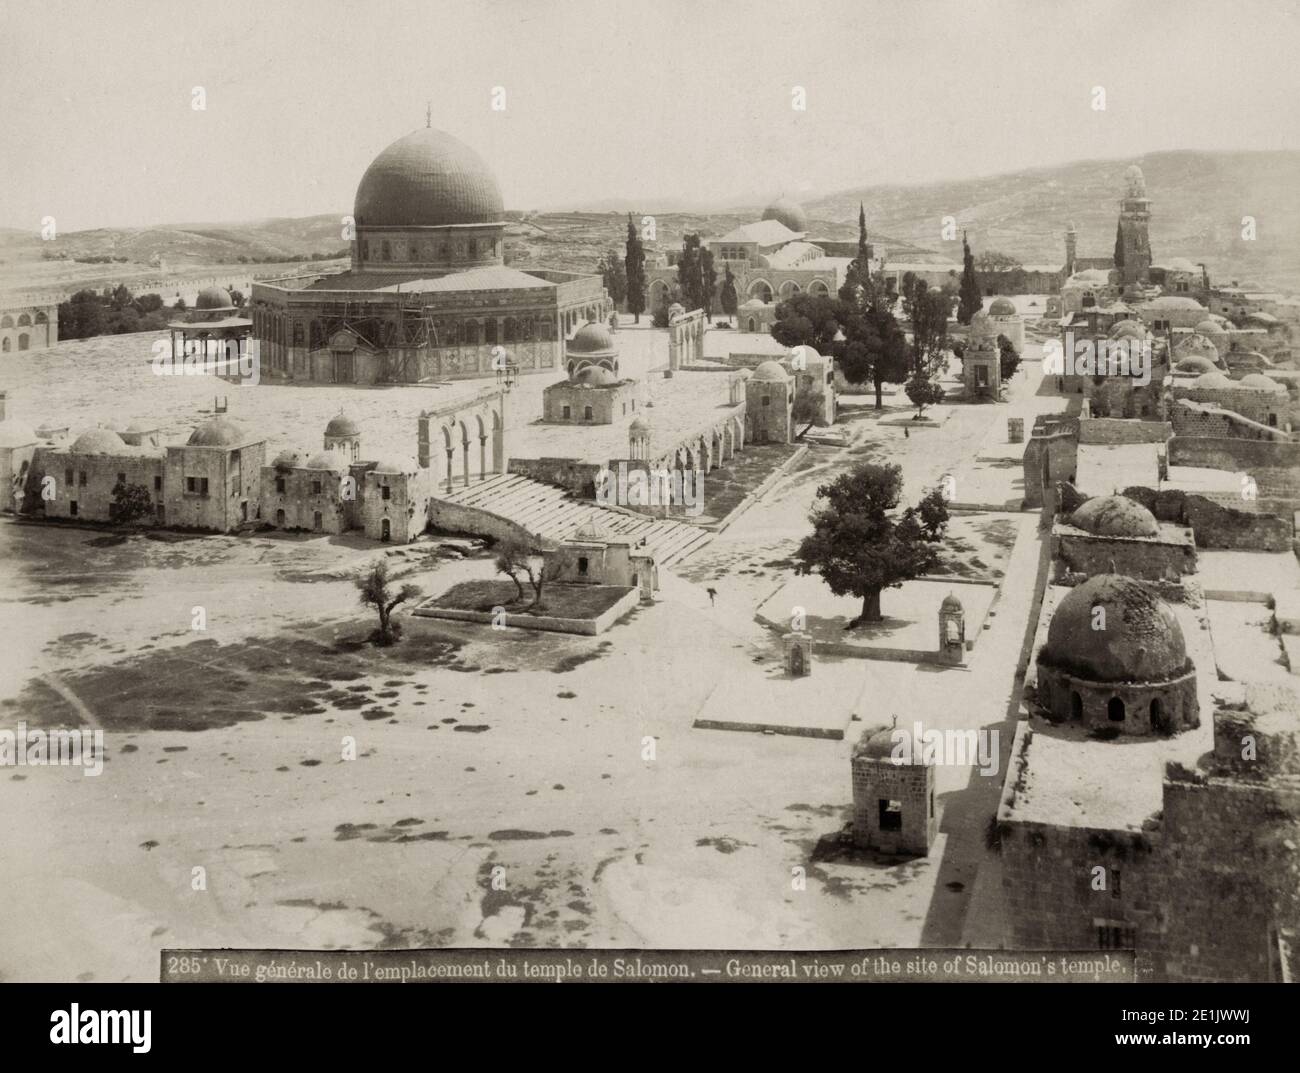 19th century vintage photograph: Al Aqsa mosque and the site of Solomon's  Temple, Temple Mount Jerusalem, Israel (Palestine). c.1890. Al-Aqsa Mosque,  located in the Old City of Jerusalem, is the third holiest